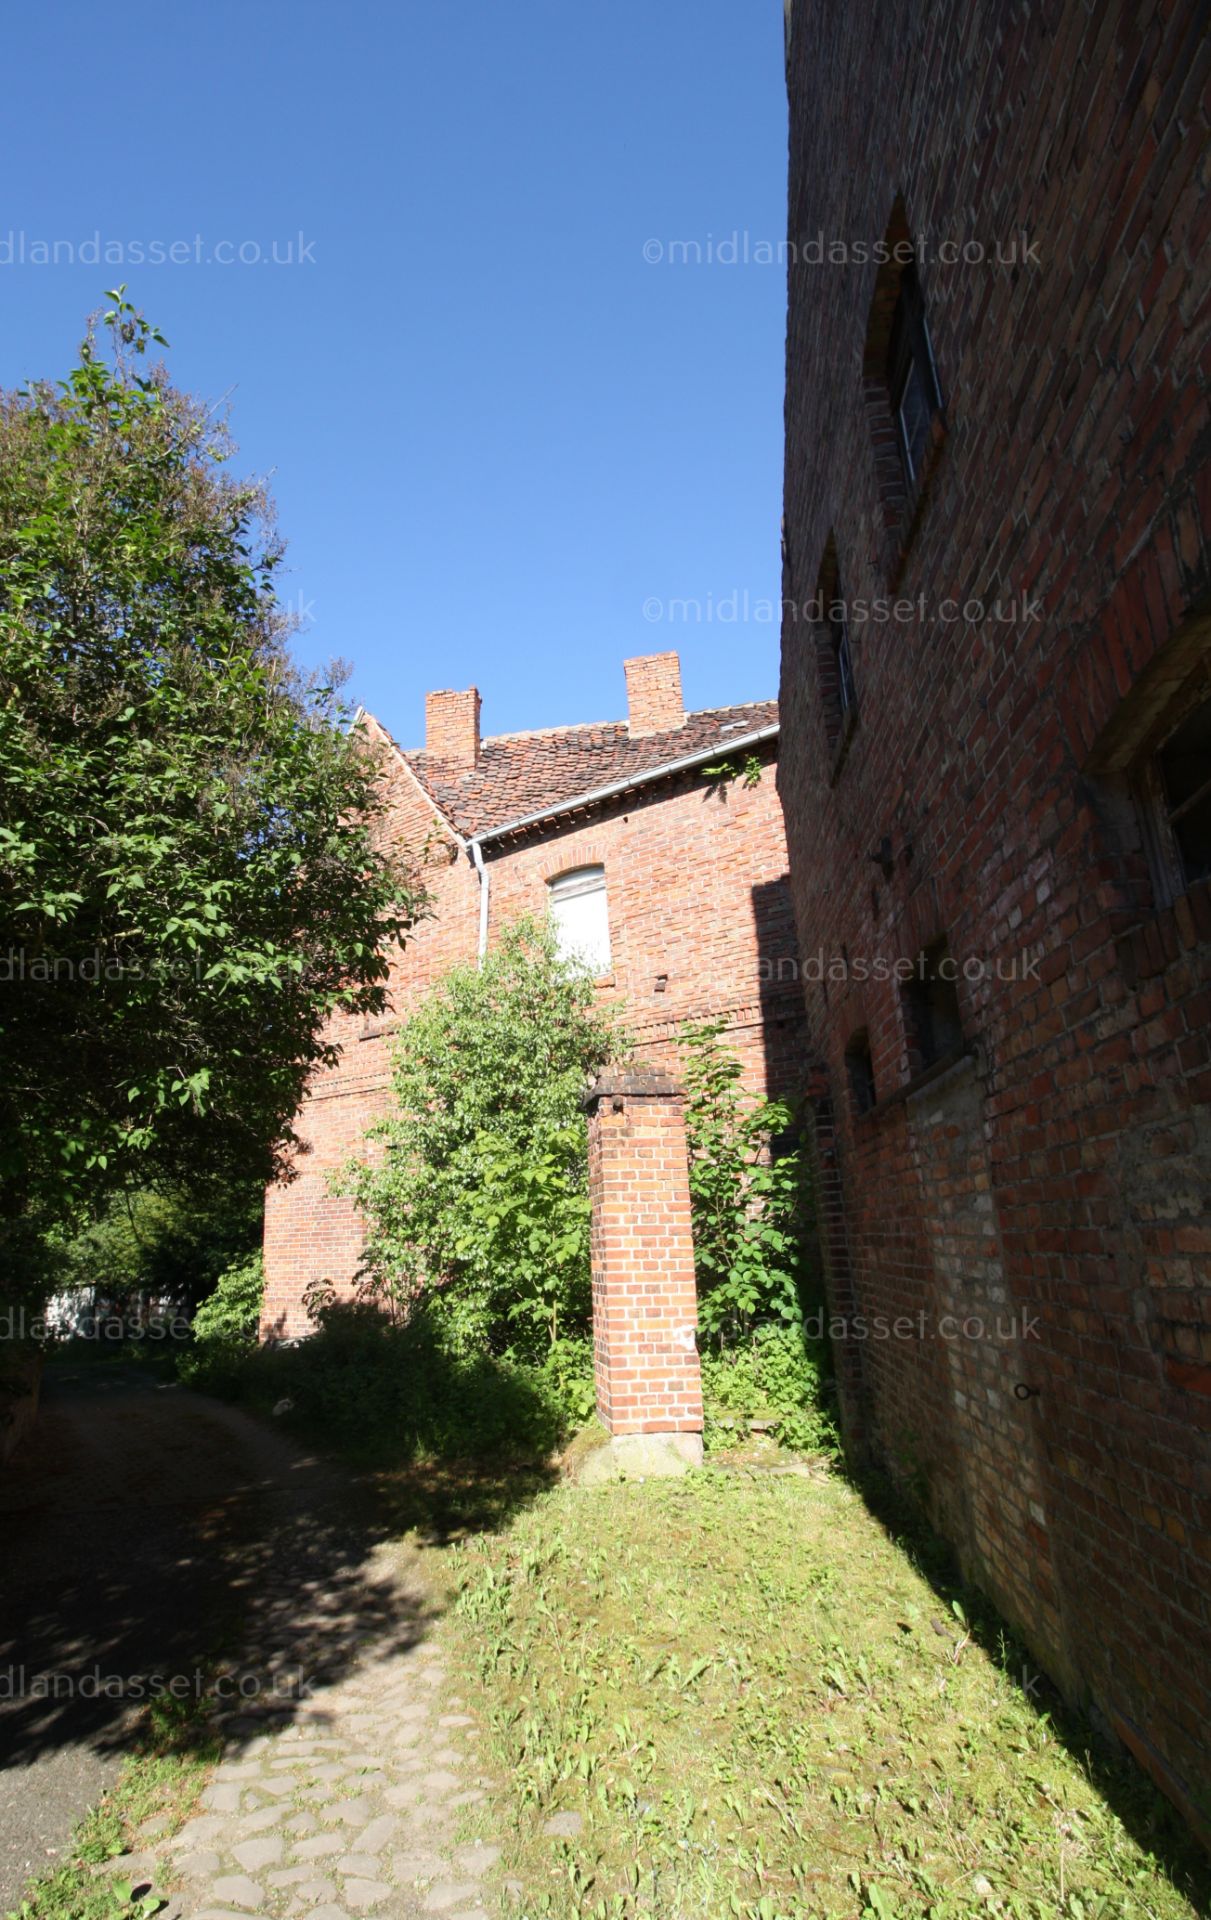 3 GERMAN PROPERTIES - ONE HOUR FROM HANNOVER - Image 3 of 24